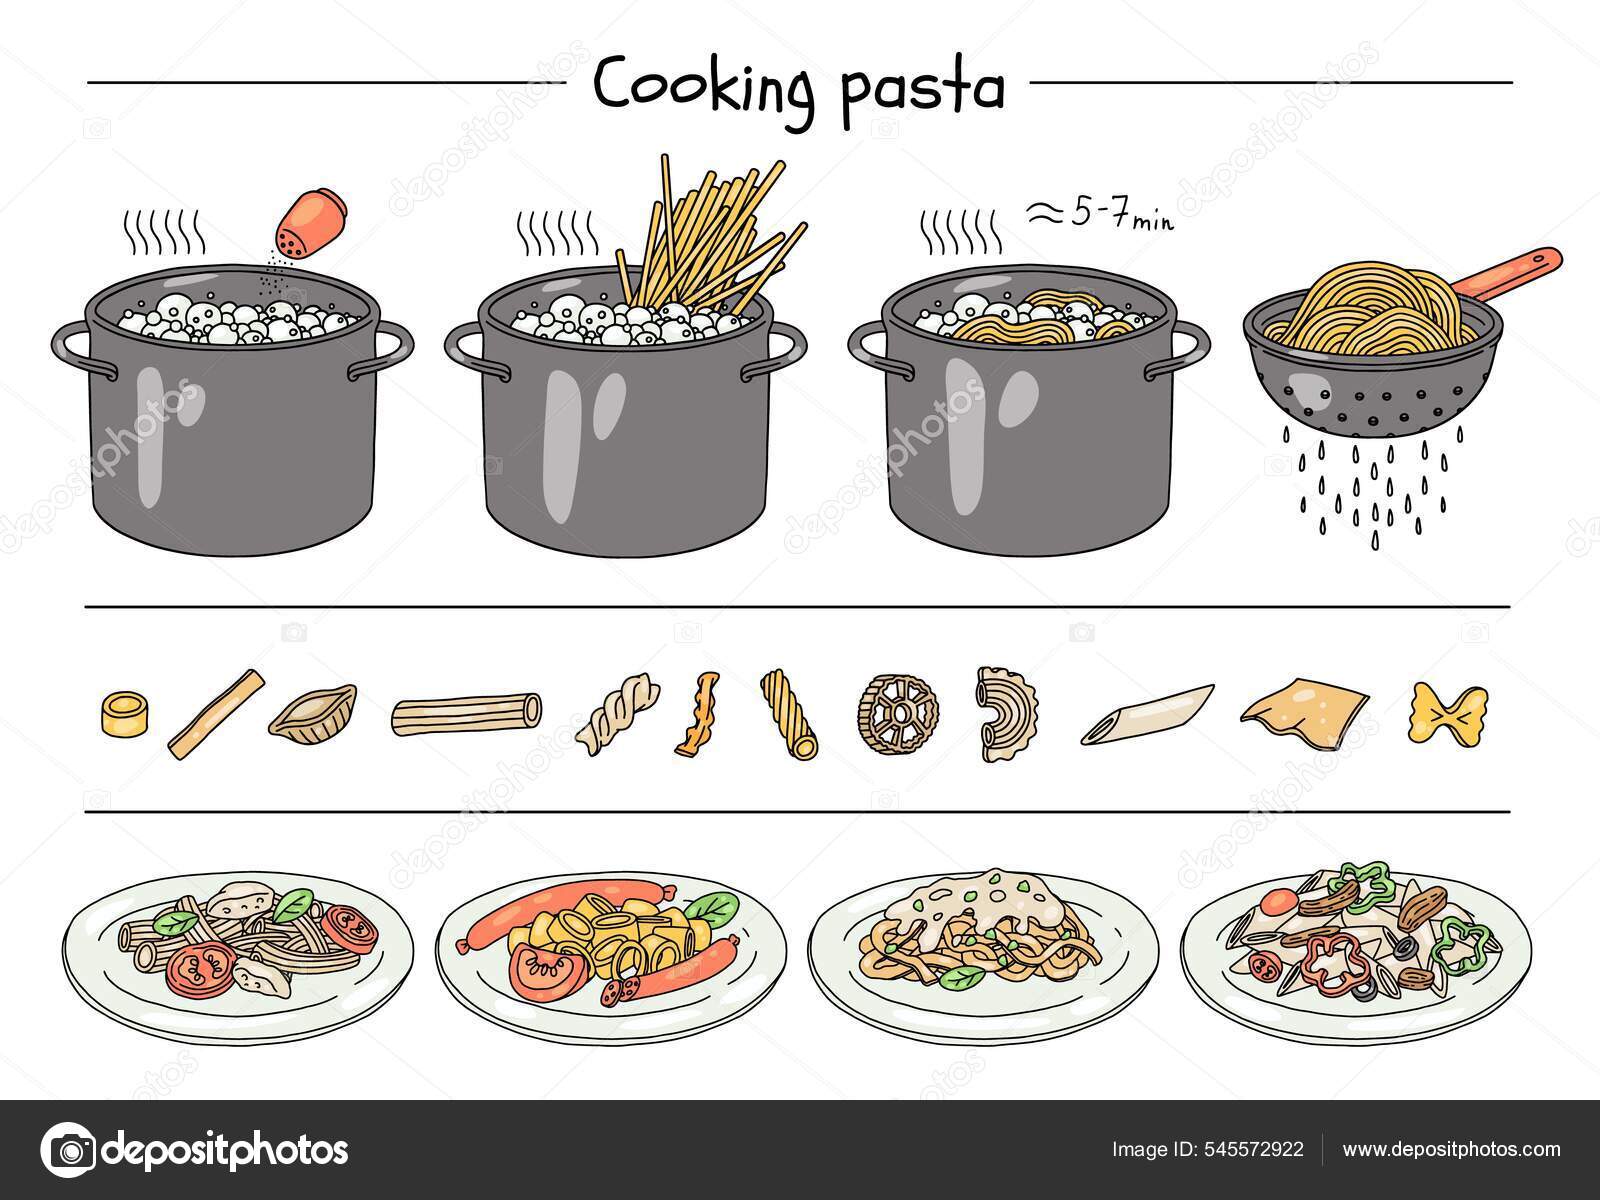 How to cook pasta: a step by step guide, Features